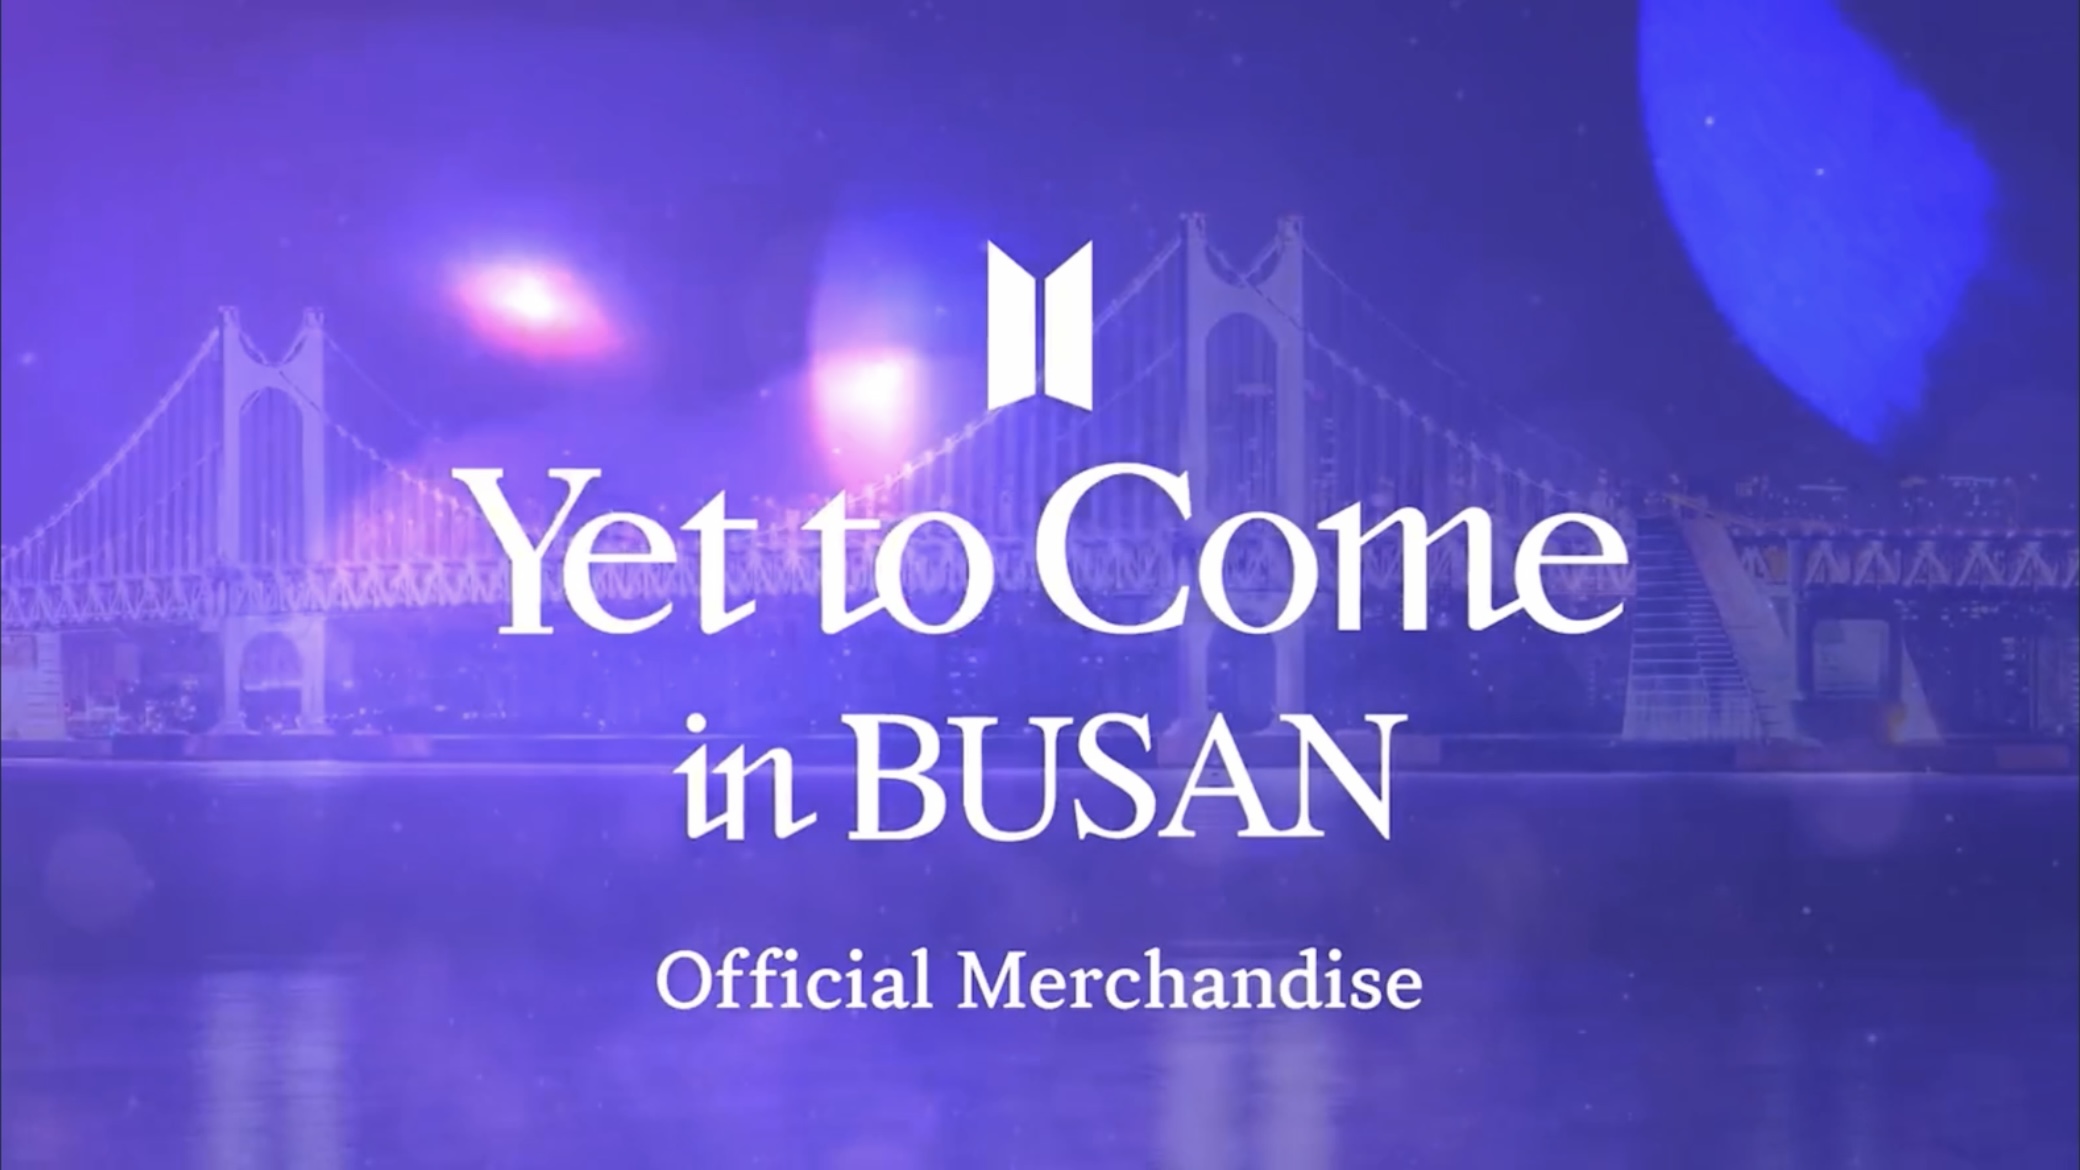 BTS 釜山コンサート「Yet To Come in BUSAN」の公式グッズが発売決定 